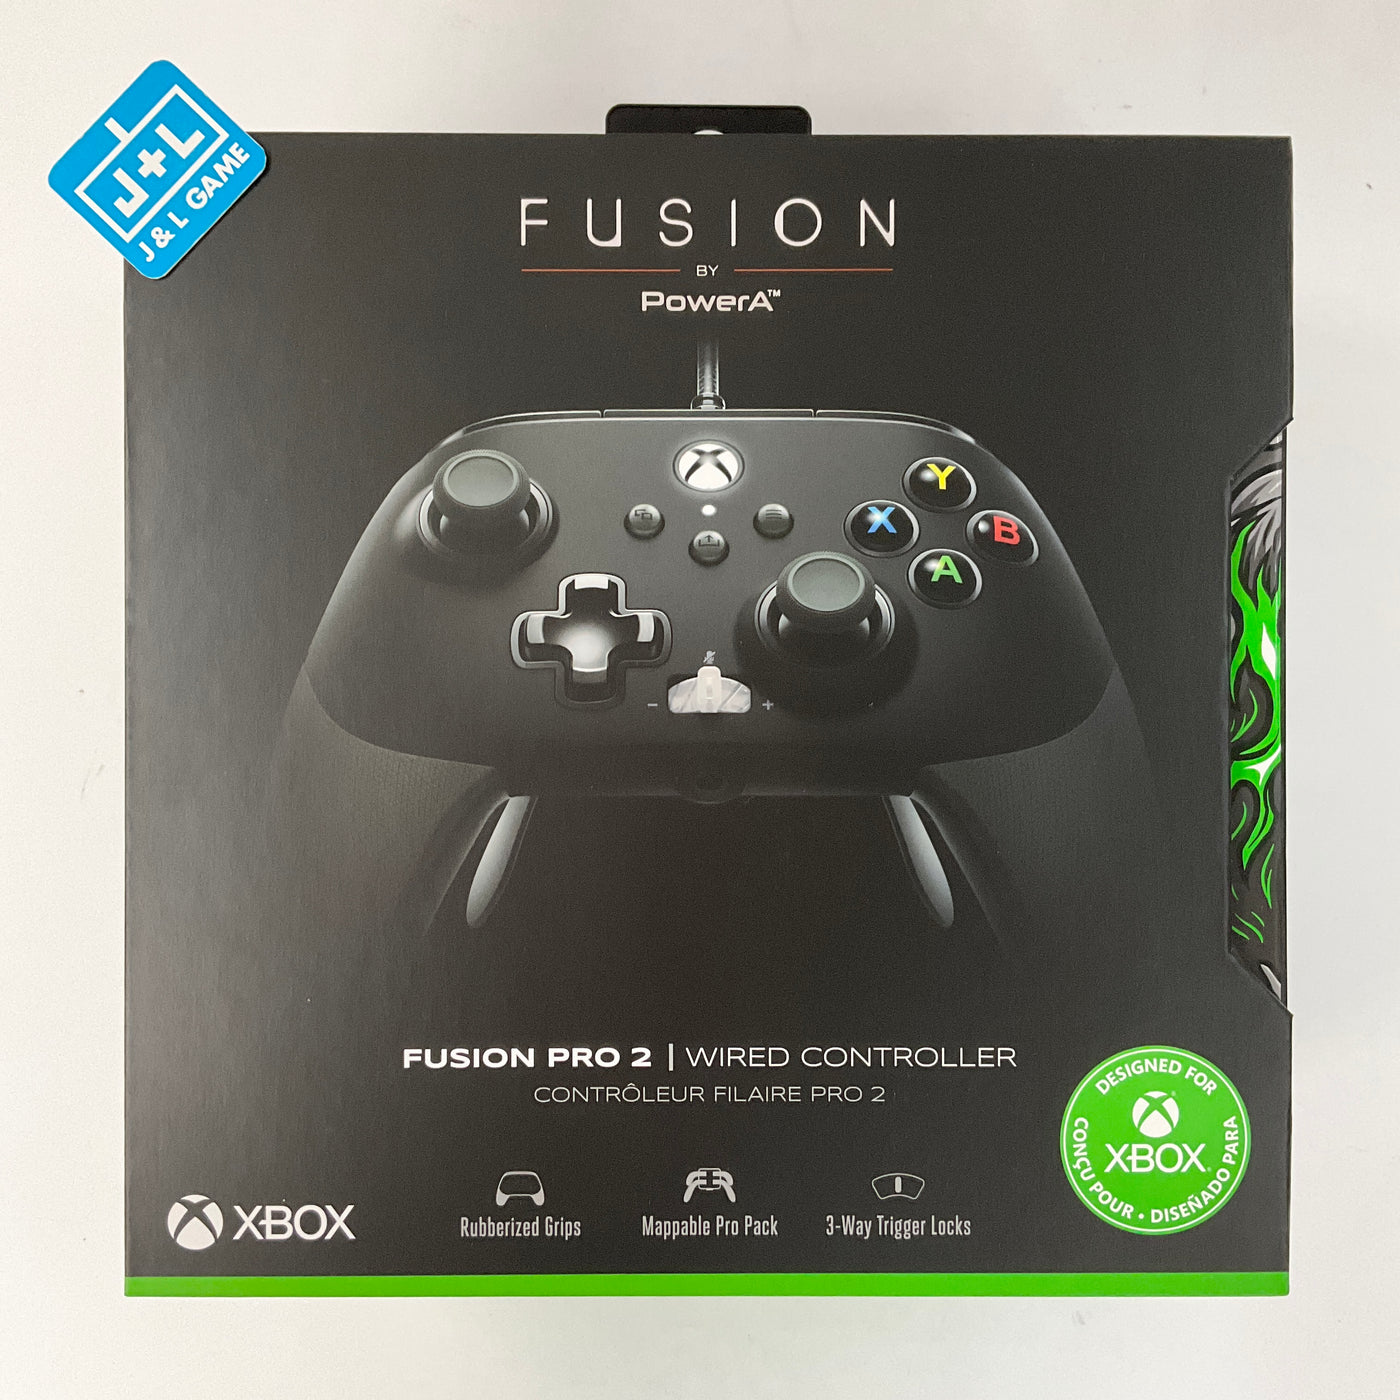 PowerA FUSION Pro Wired Controller for Xbox One - Black, Gamepad, Wired  Video Game Controller, Gaming Controller, Xbox One, Works with Xbox Series  X|S